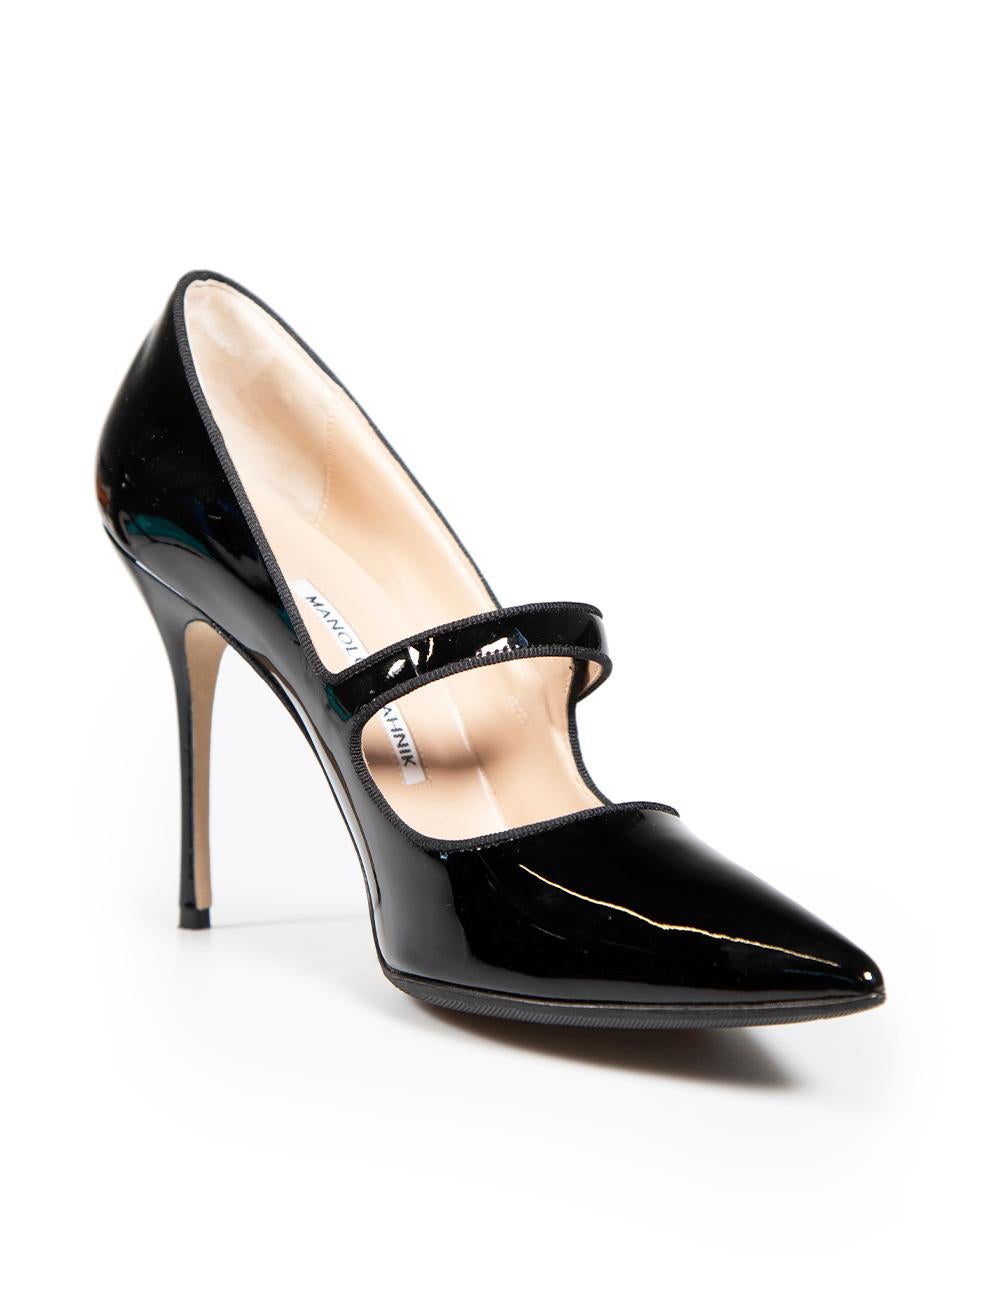 CONDITION is Very good. Hardly any visible wear to heels is evident on this Manolo Blahnik designer resale item. Please note these heels have been resoled. Comes with original dust bag and box
 
 
 
 Details
 
 
 Model: Campari
 
 Black
 
 Patent